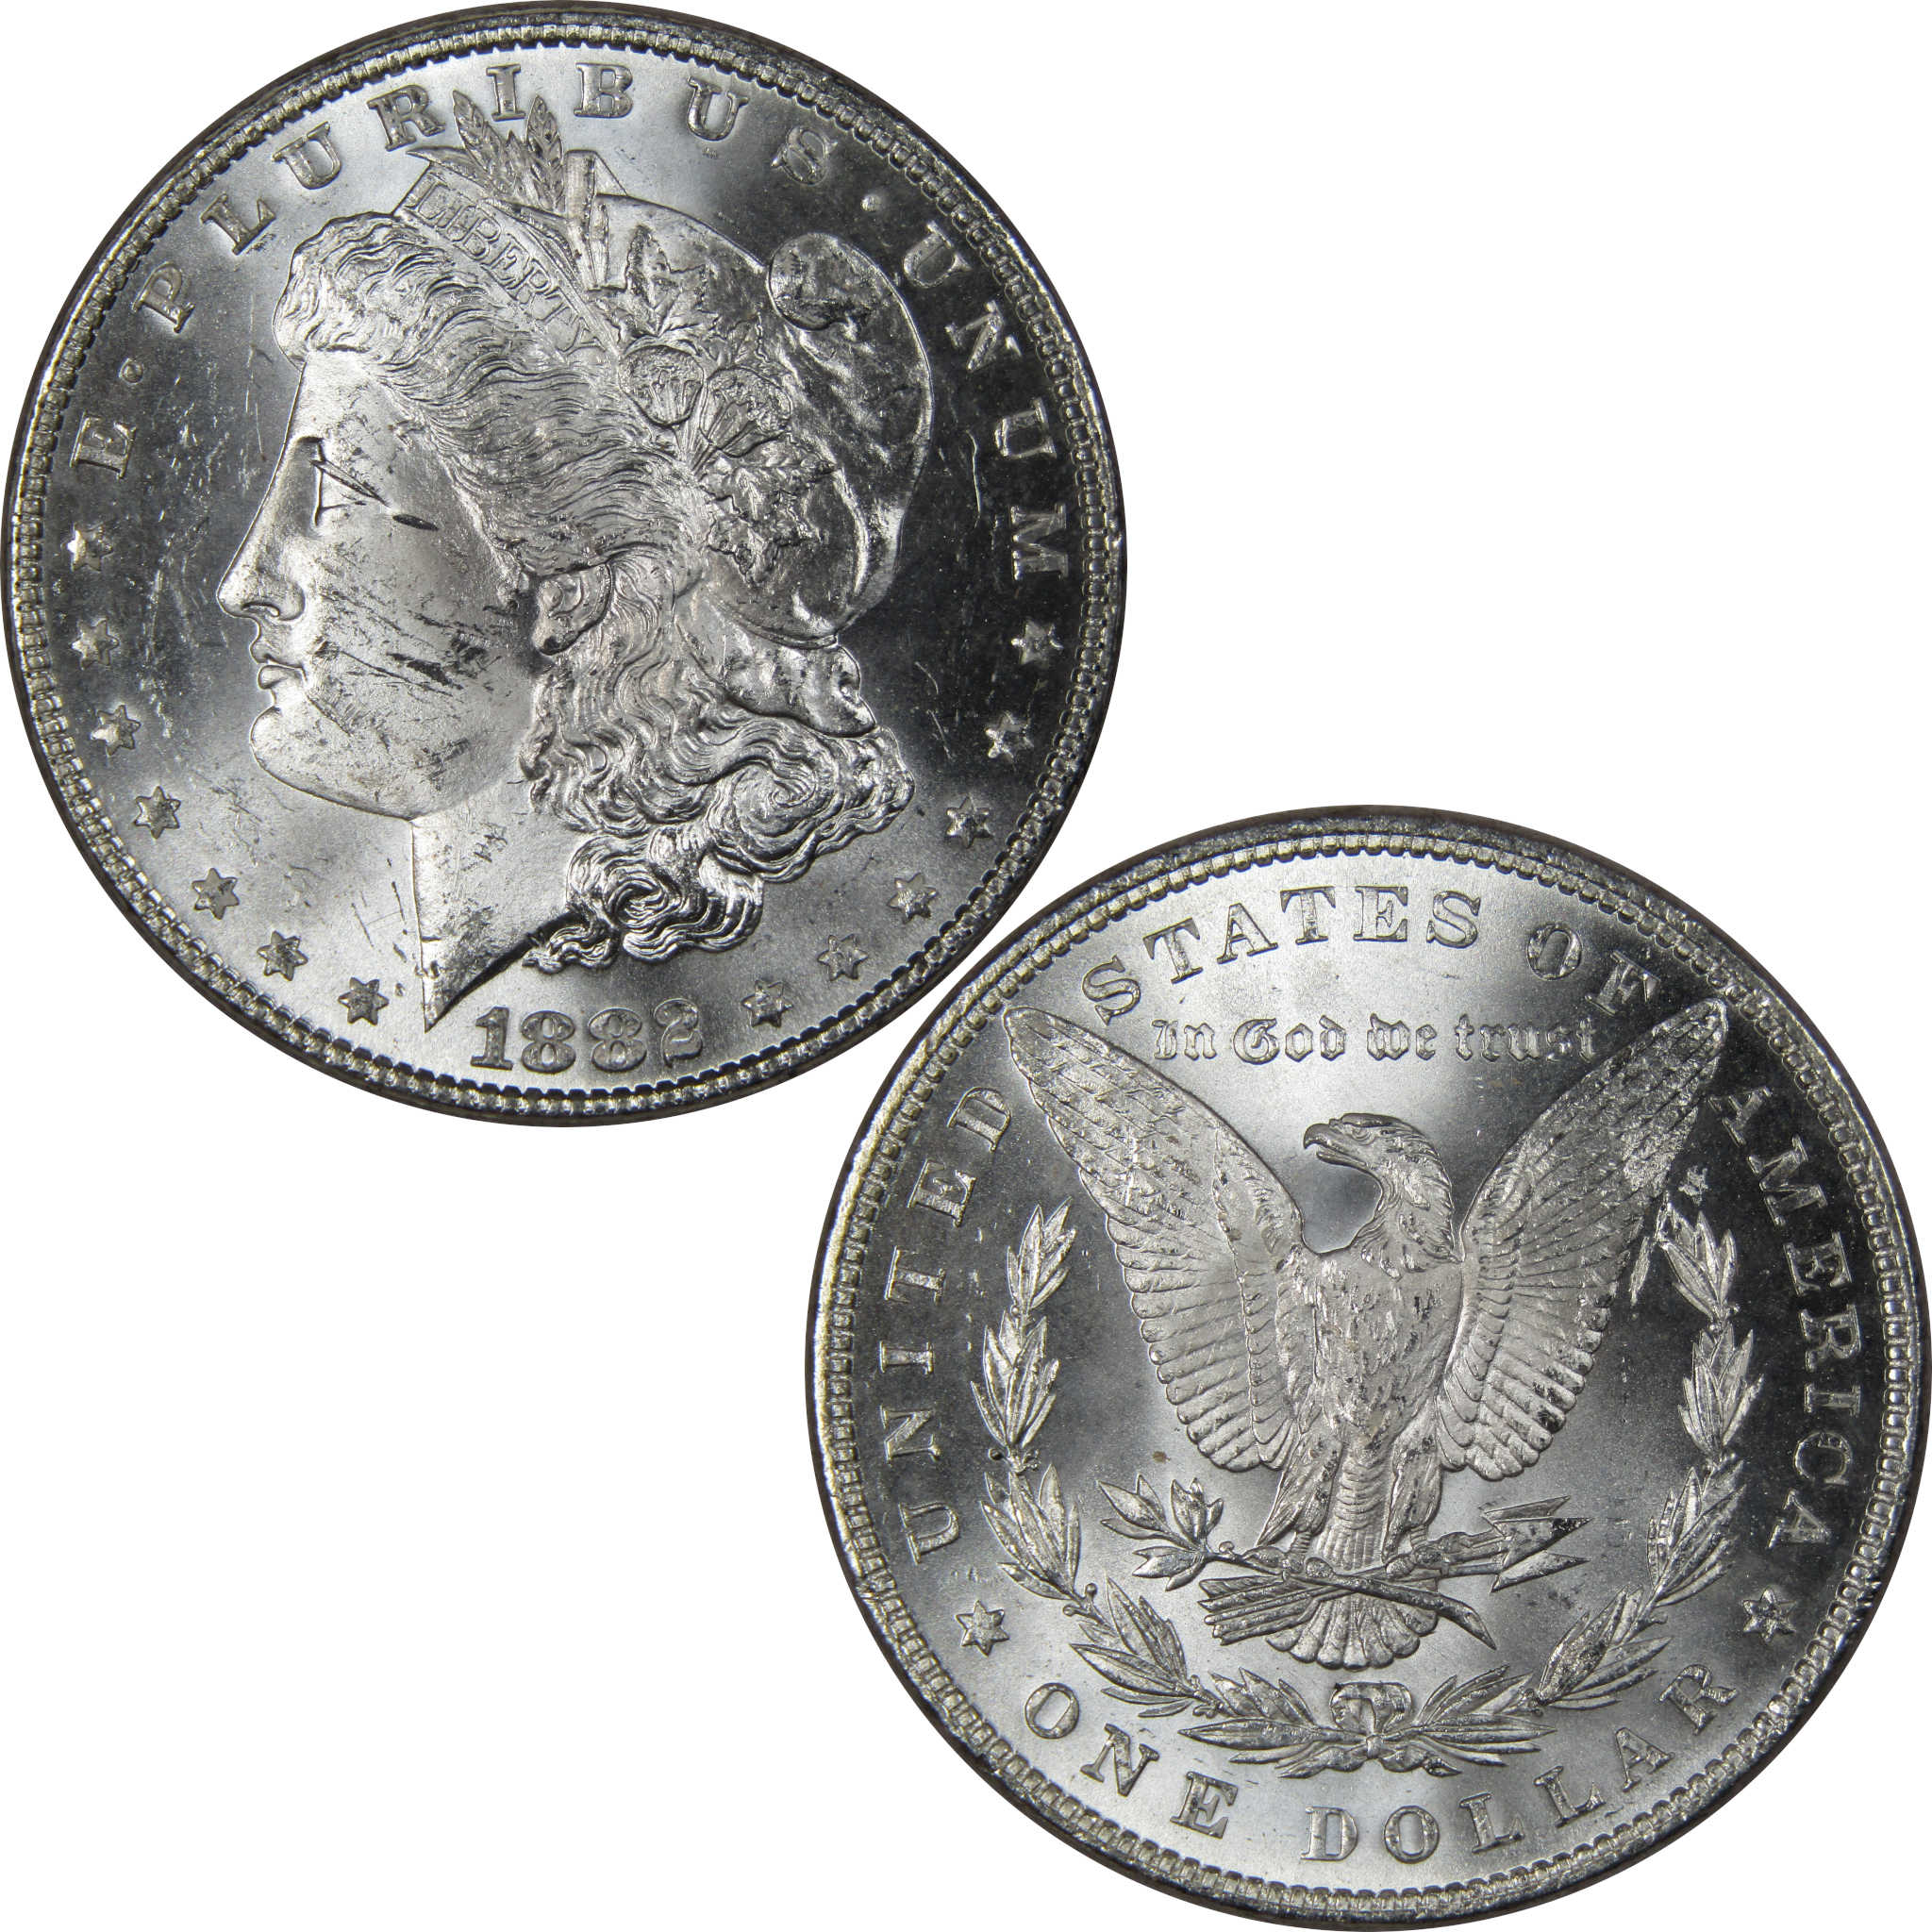 1882 Morgan Dollar BU Uncirculated Mint State 90% Silver SKU:IPC9679 - Morgan coin - Morgan silver dollar - Morgan silver dollar for sale - Profile Coins &amp; Collectibles